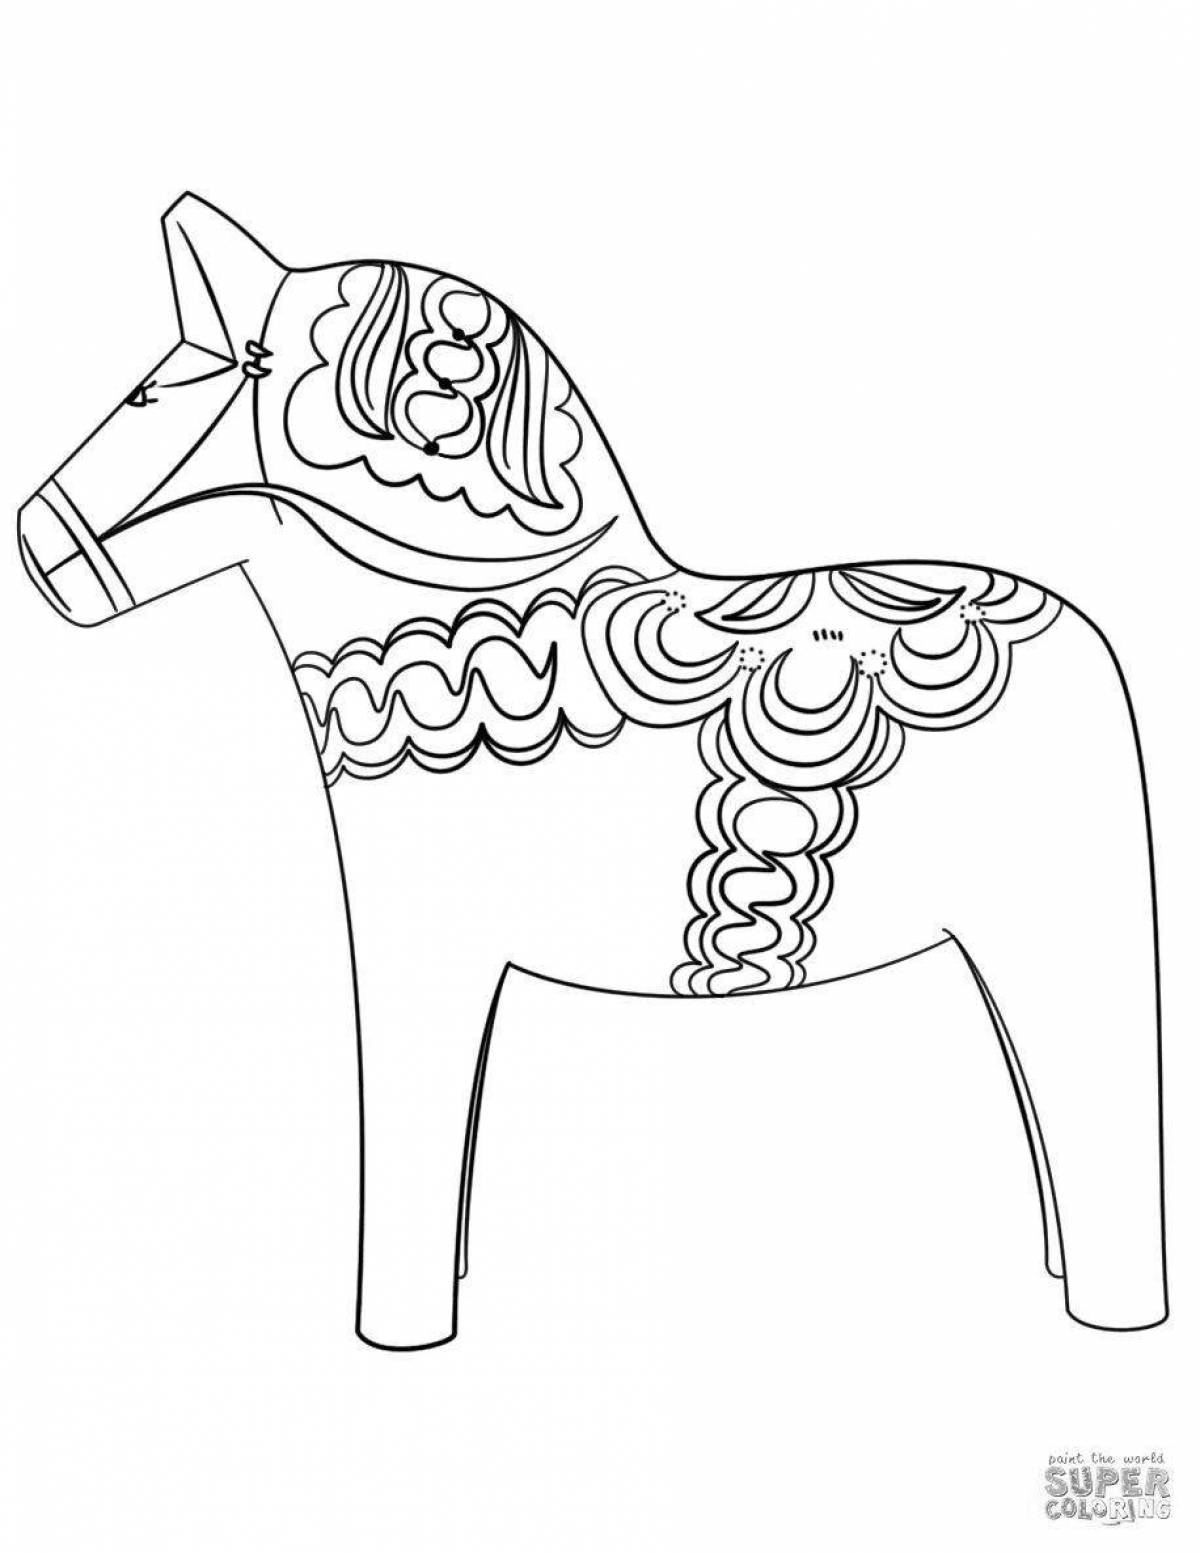 Coloring book playful roman toy